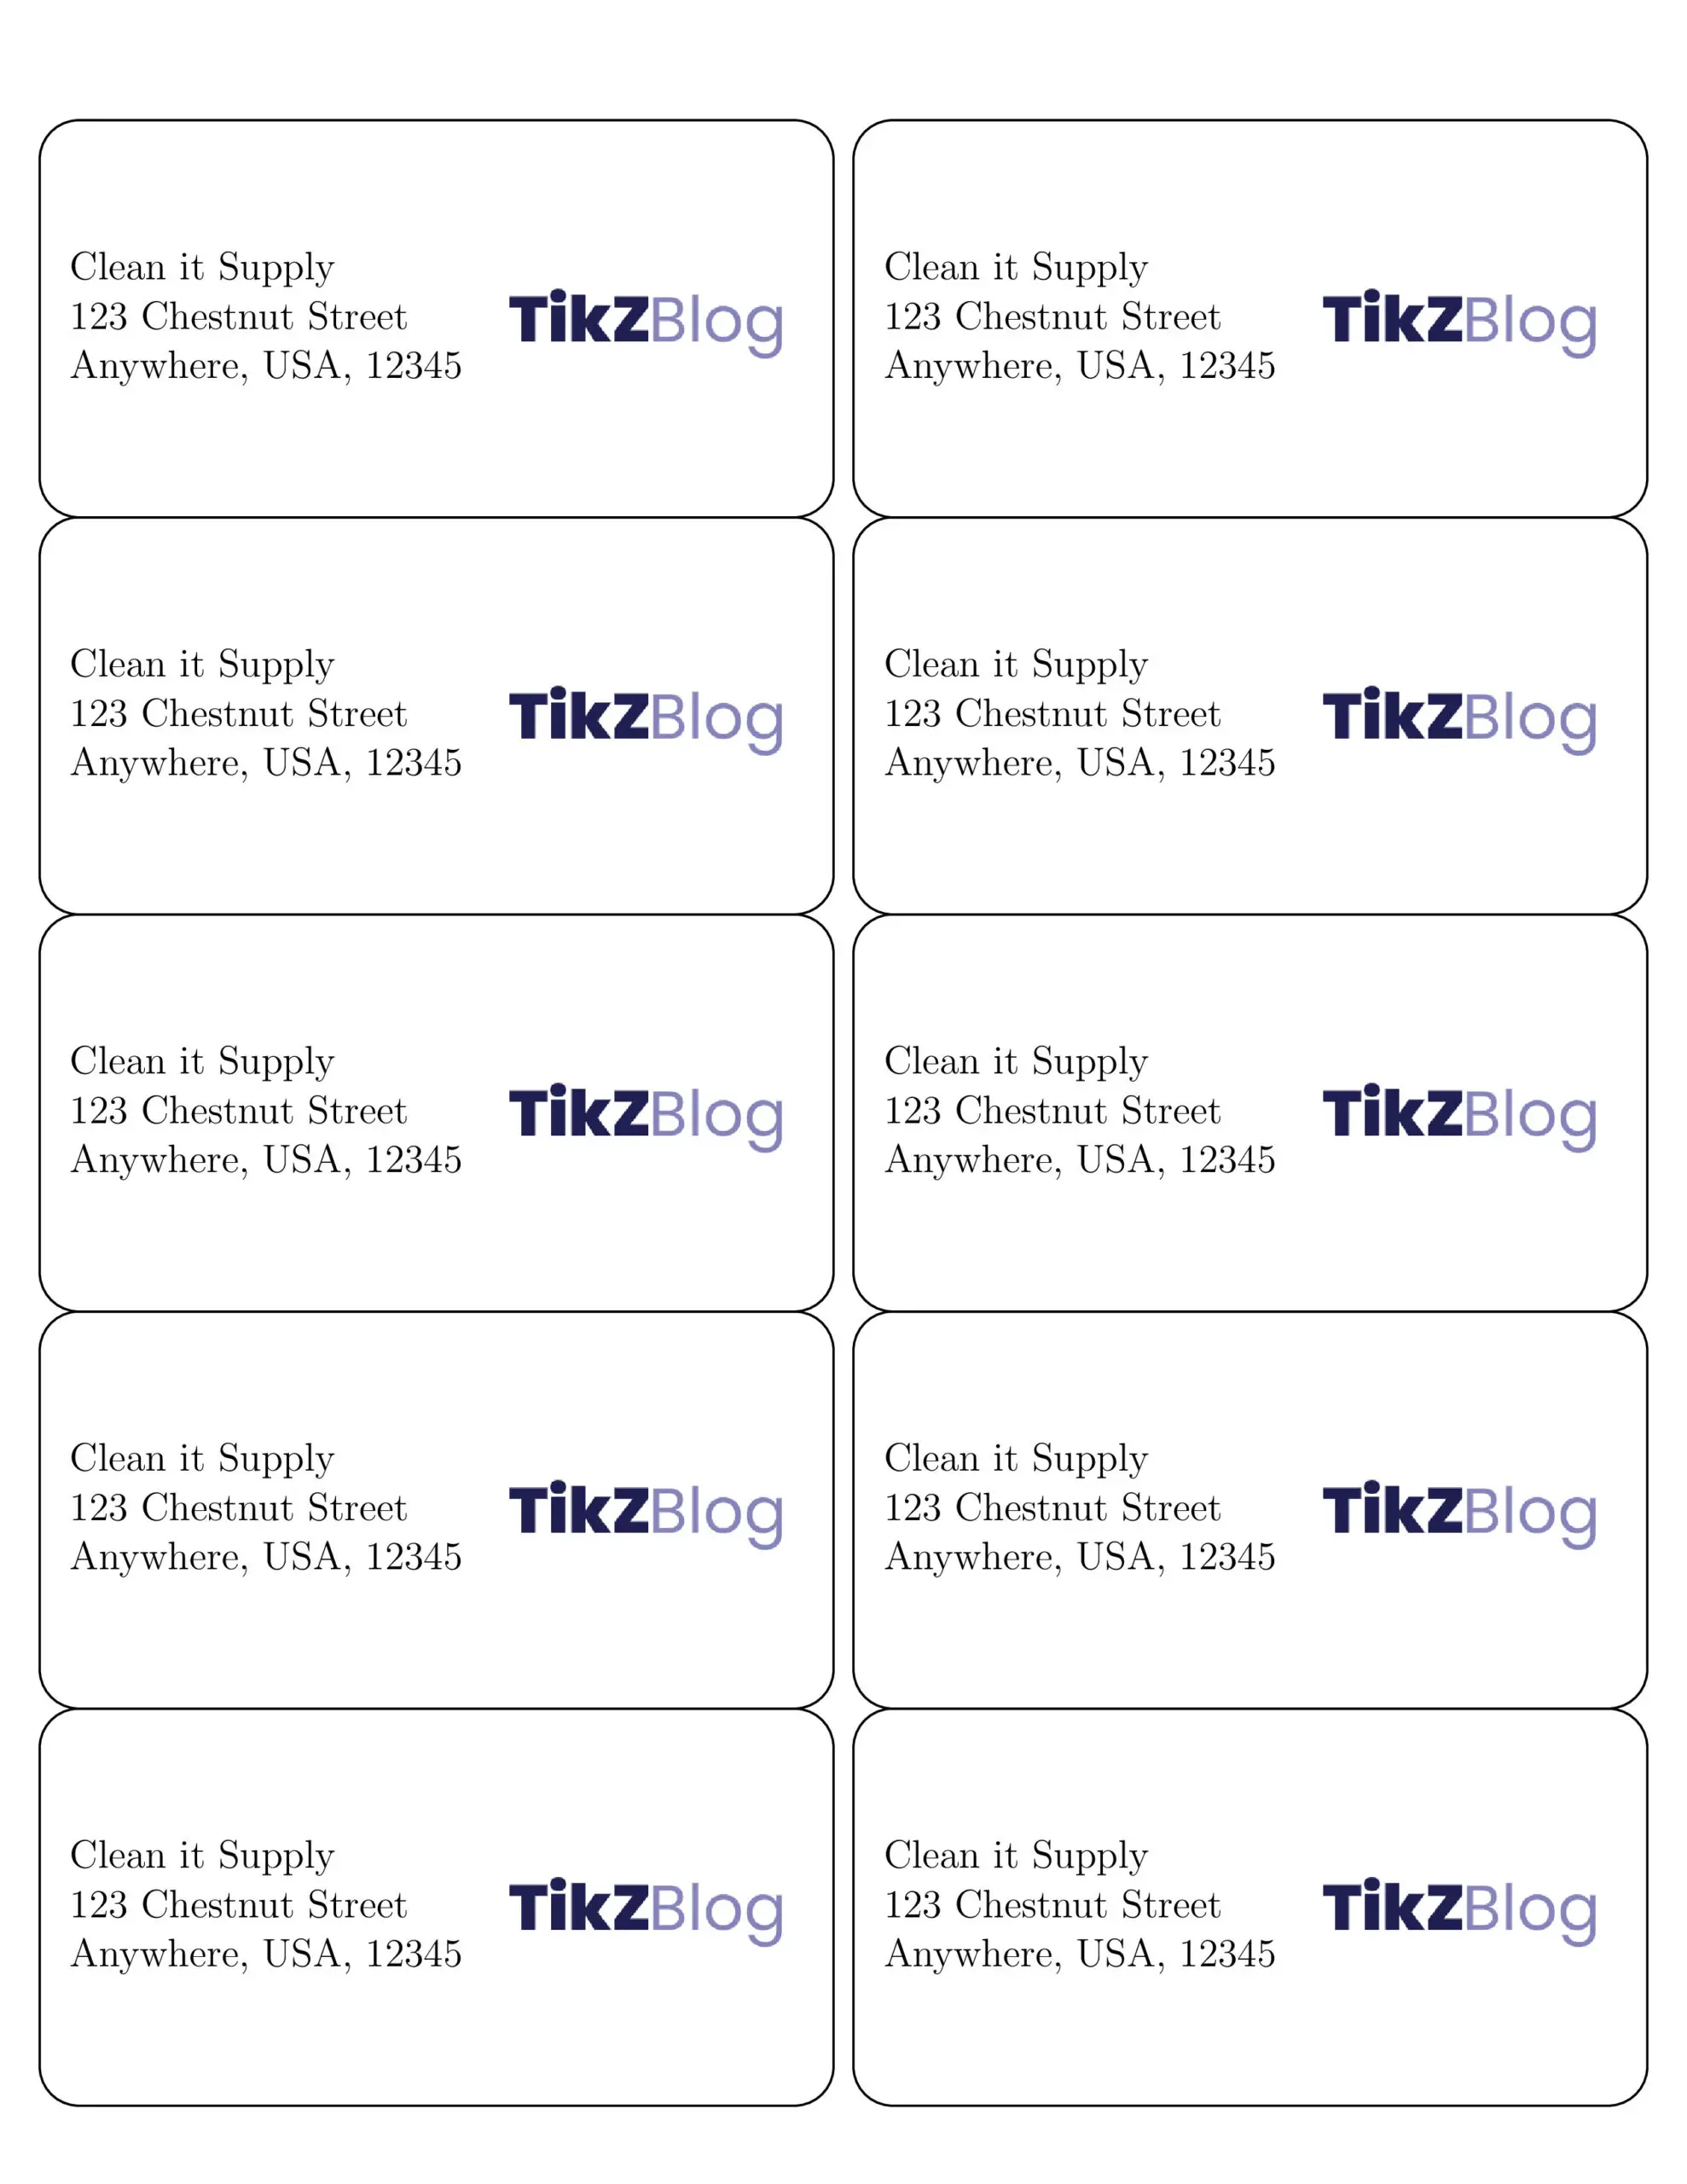 Shipping Label 21 Template in LaTeX - TikZBlog In Package Mailing Label Template